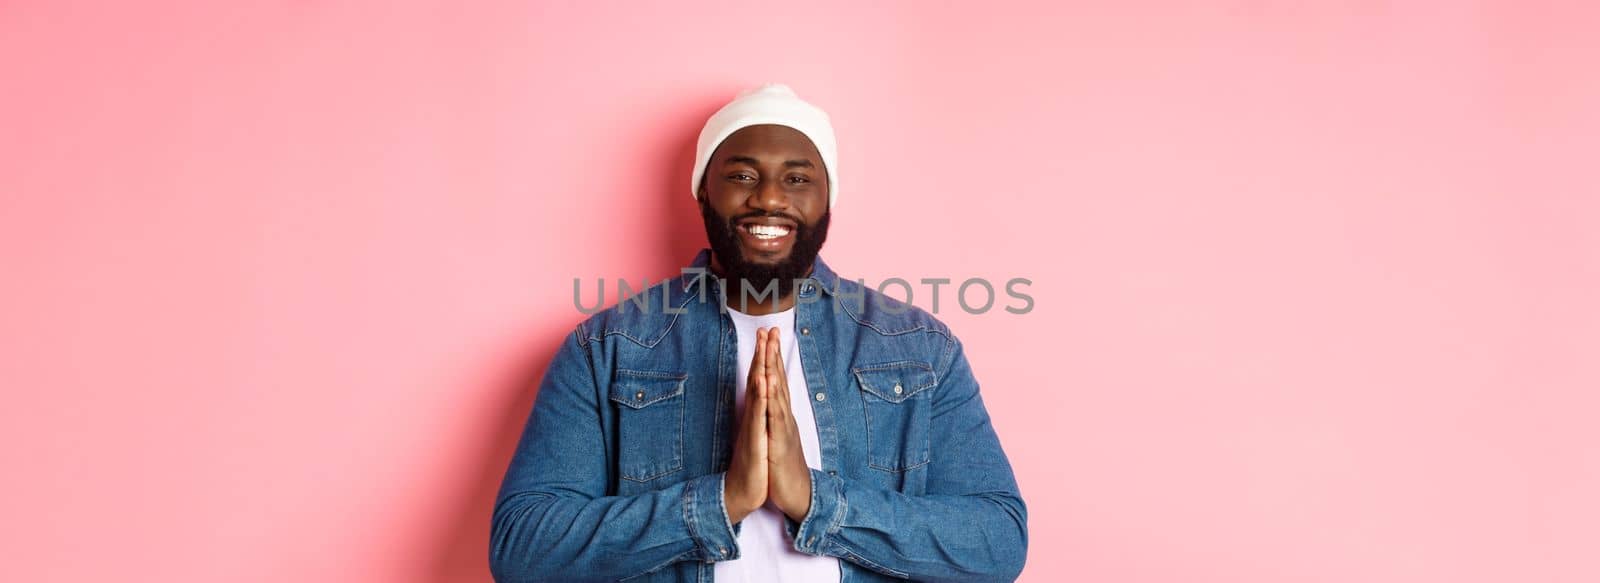 Happy smiling Black man saying thank you, holding hands in pray or namaste gesture, standing grateful against pink background.